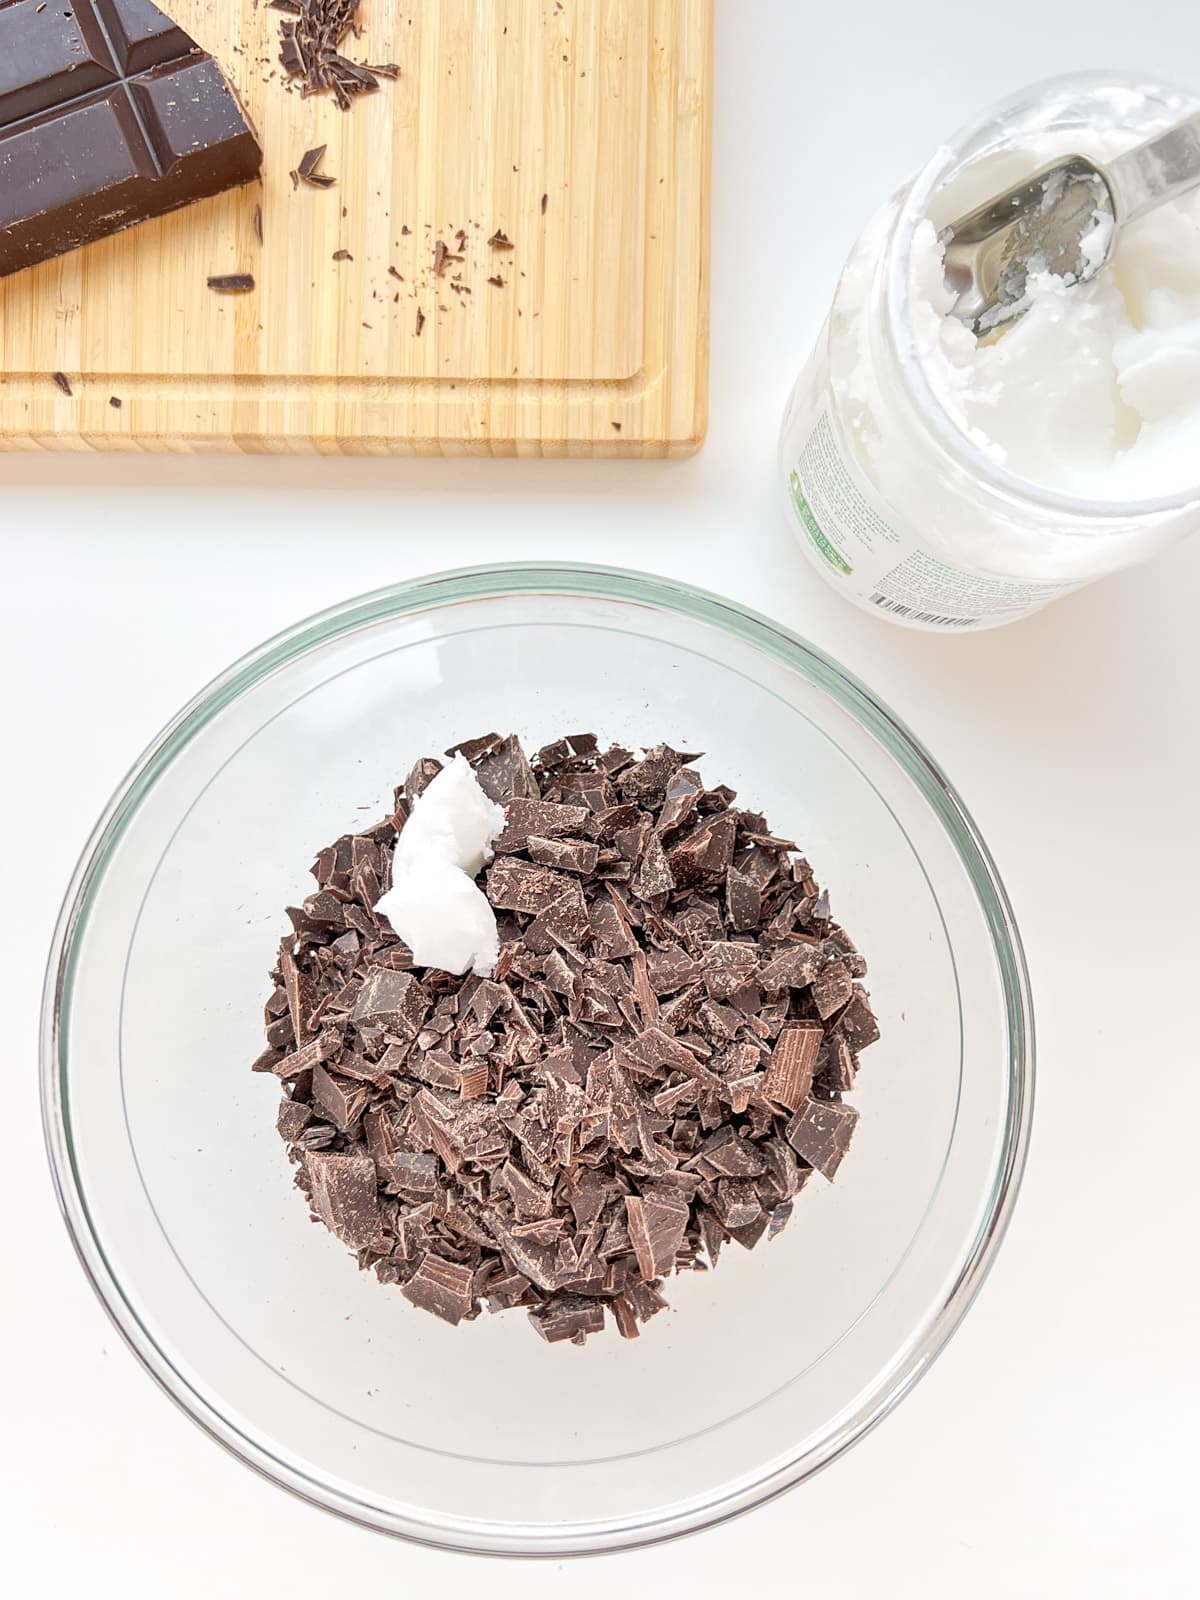 An image of a glass bowl containing chopped chocolate and coconut oil, with chocolate and coconut oil visible in the background.